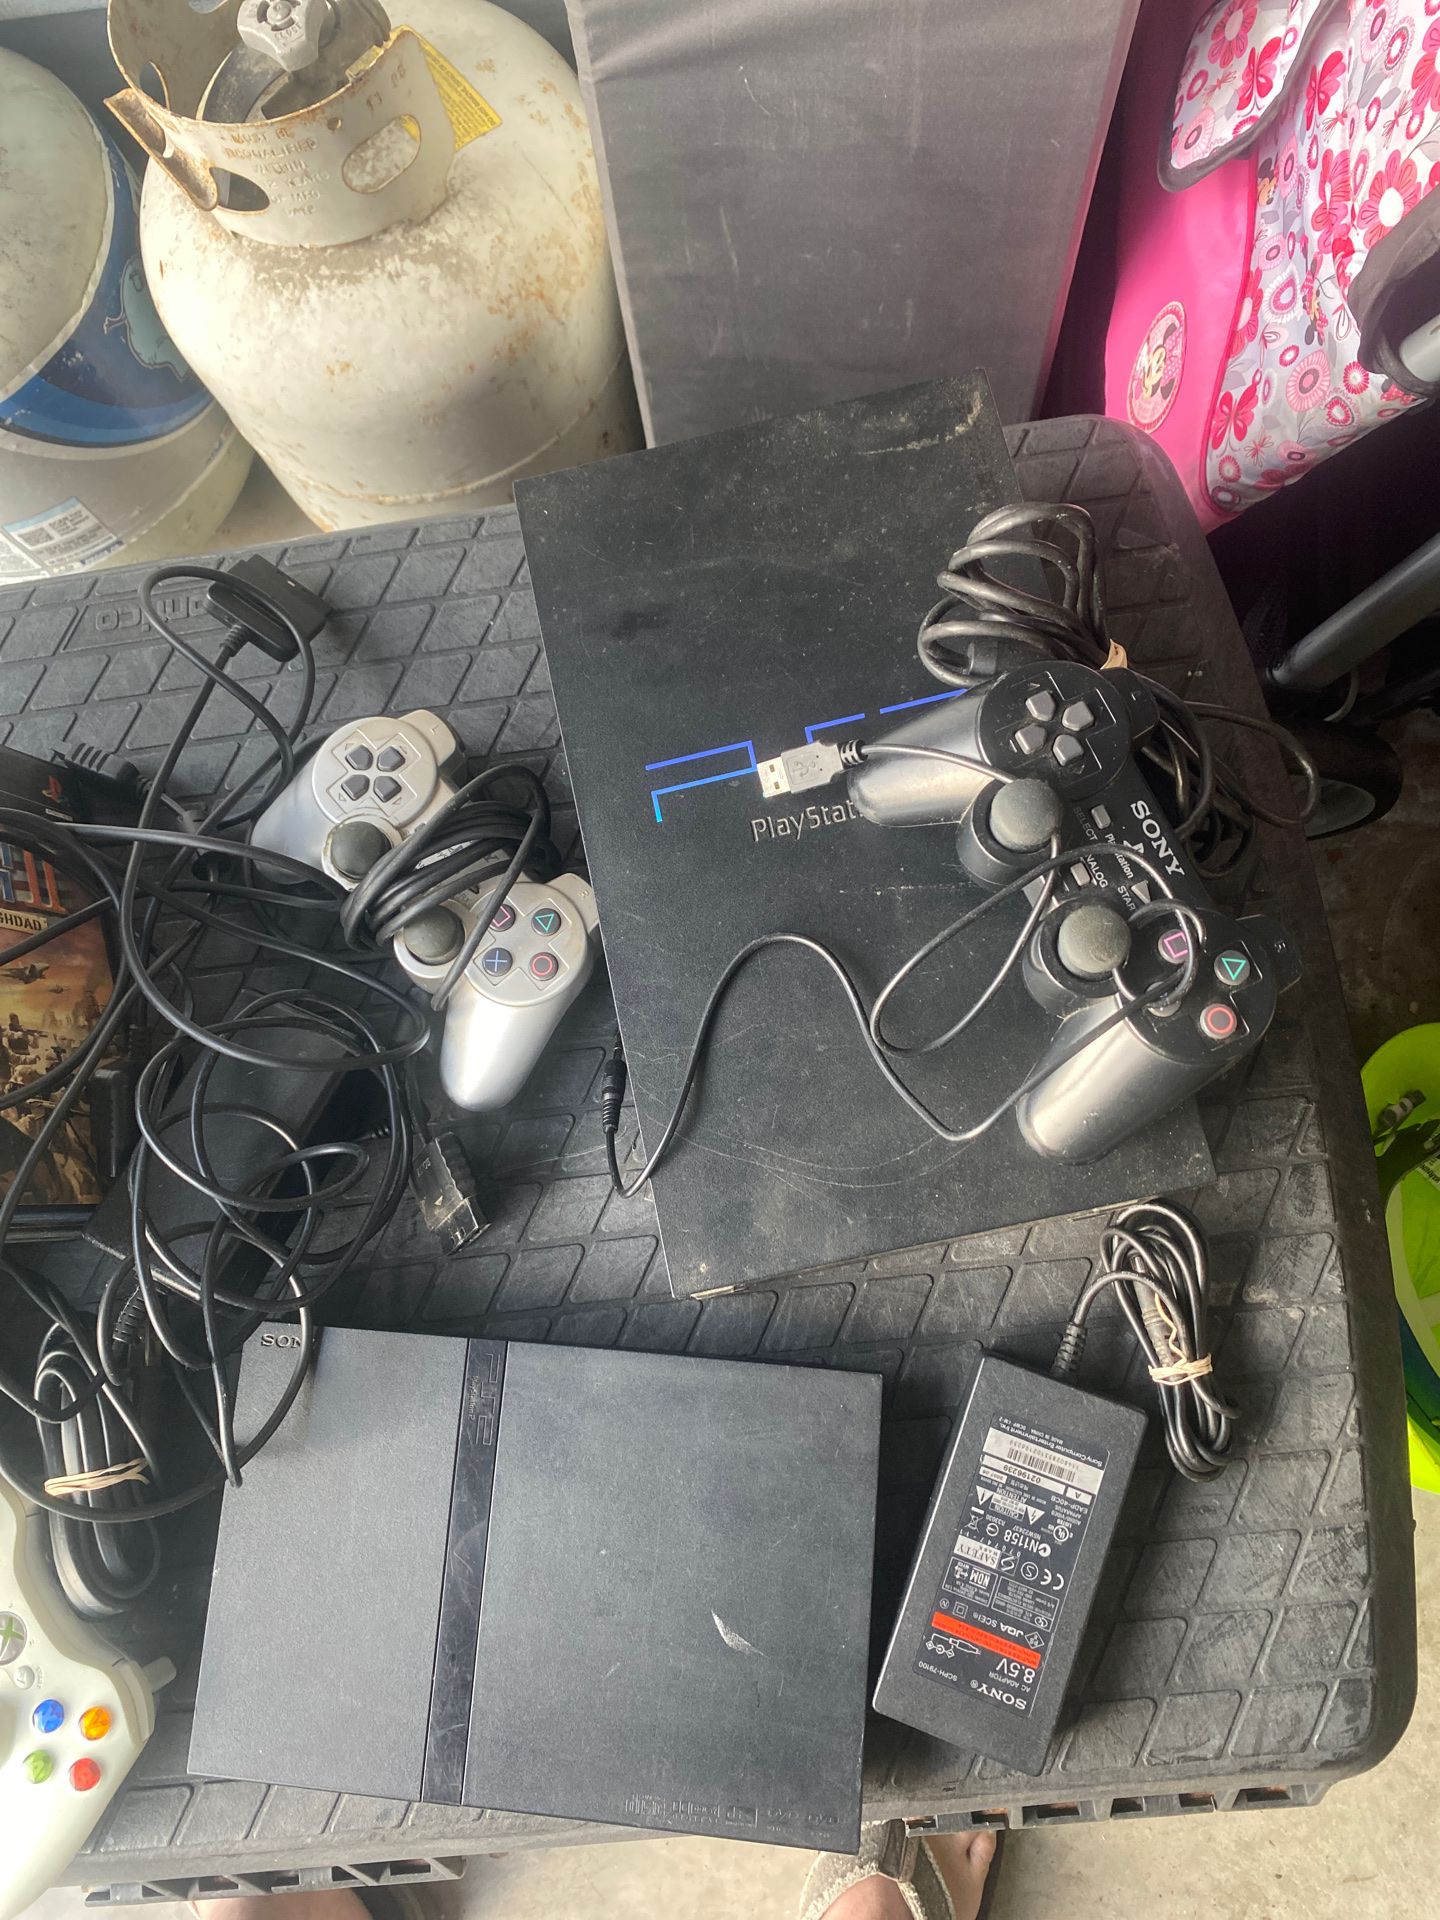 PS2 and 5+ games